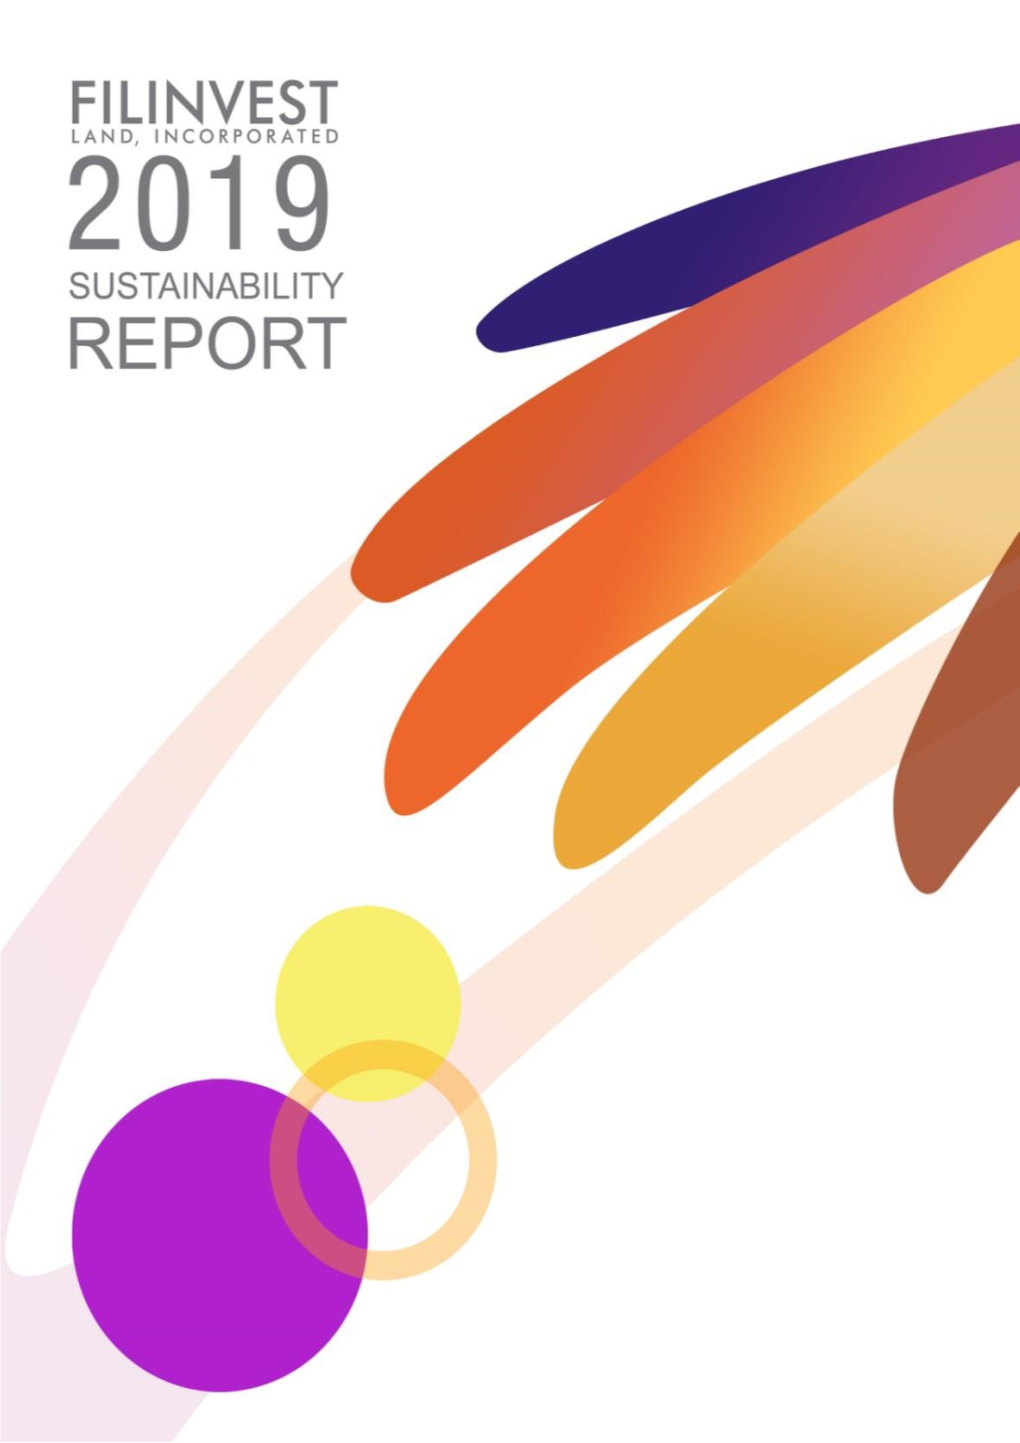 Sustainability Report Where We Share Our Progress and the Latest Initiatives in 2019